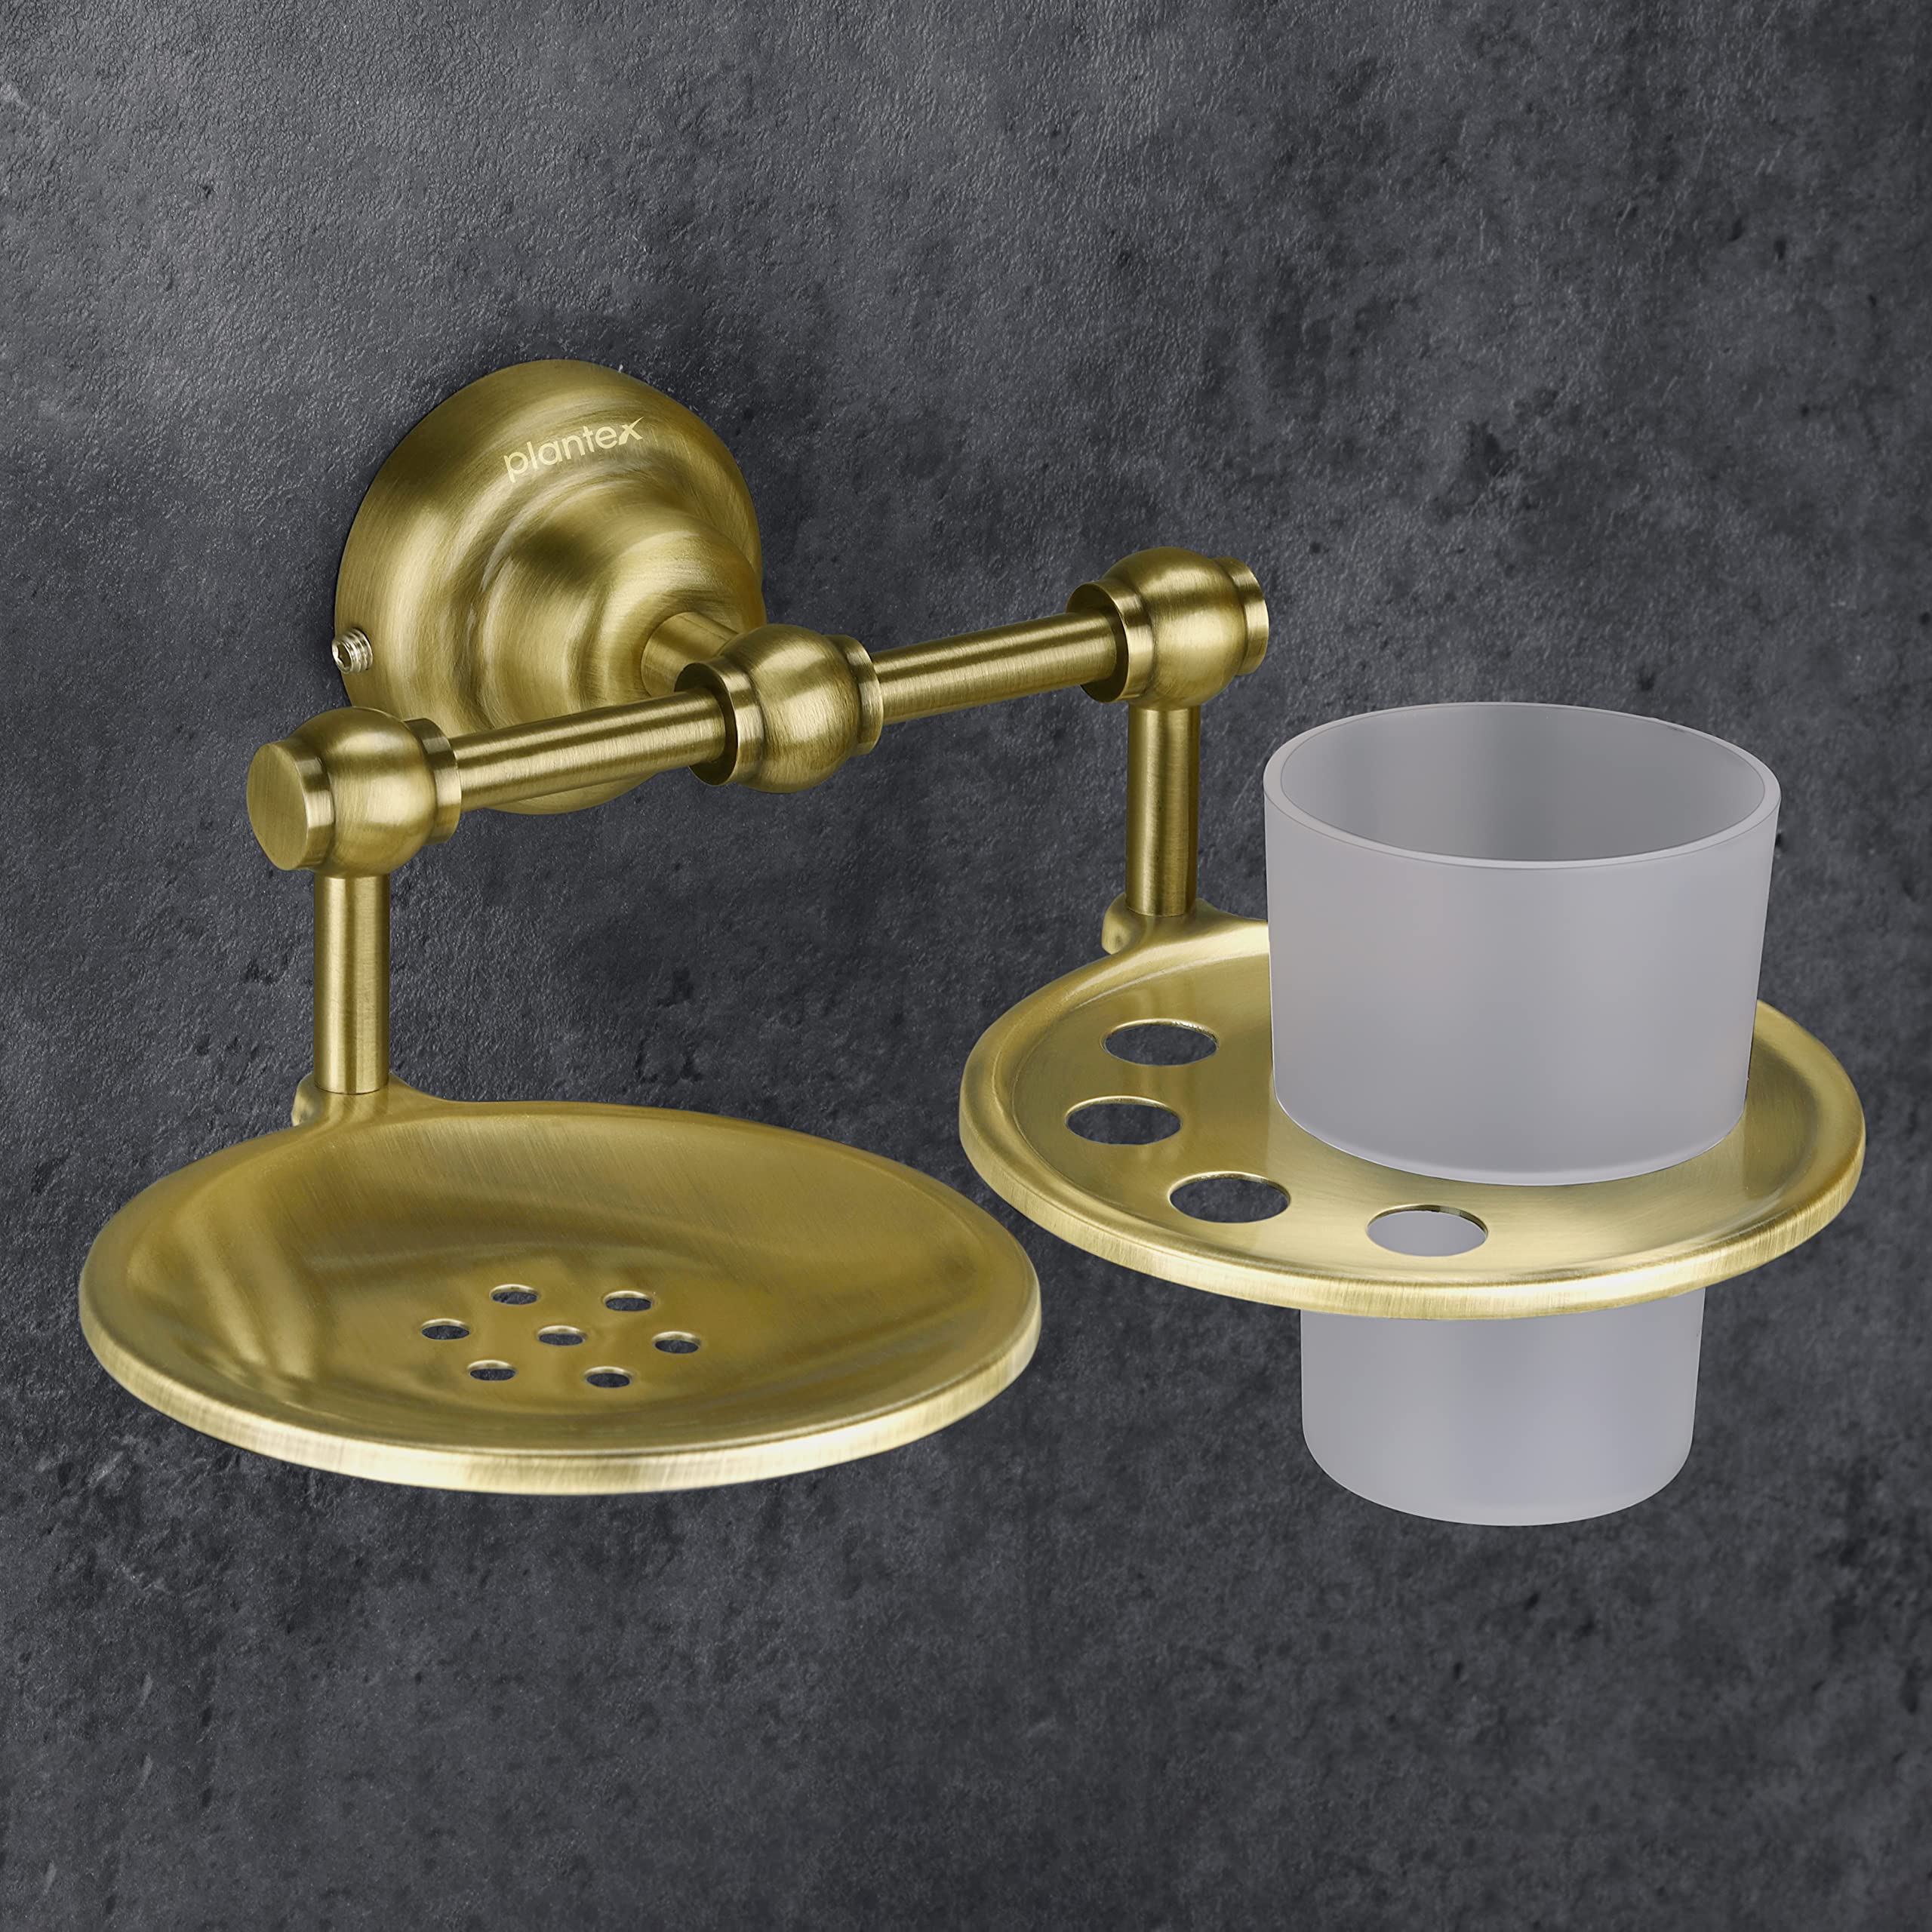 Plantex Skyllo Antique Bathroom Double soap Holder/Stand/case (304 Stainless Steel)